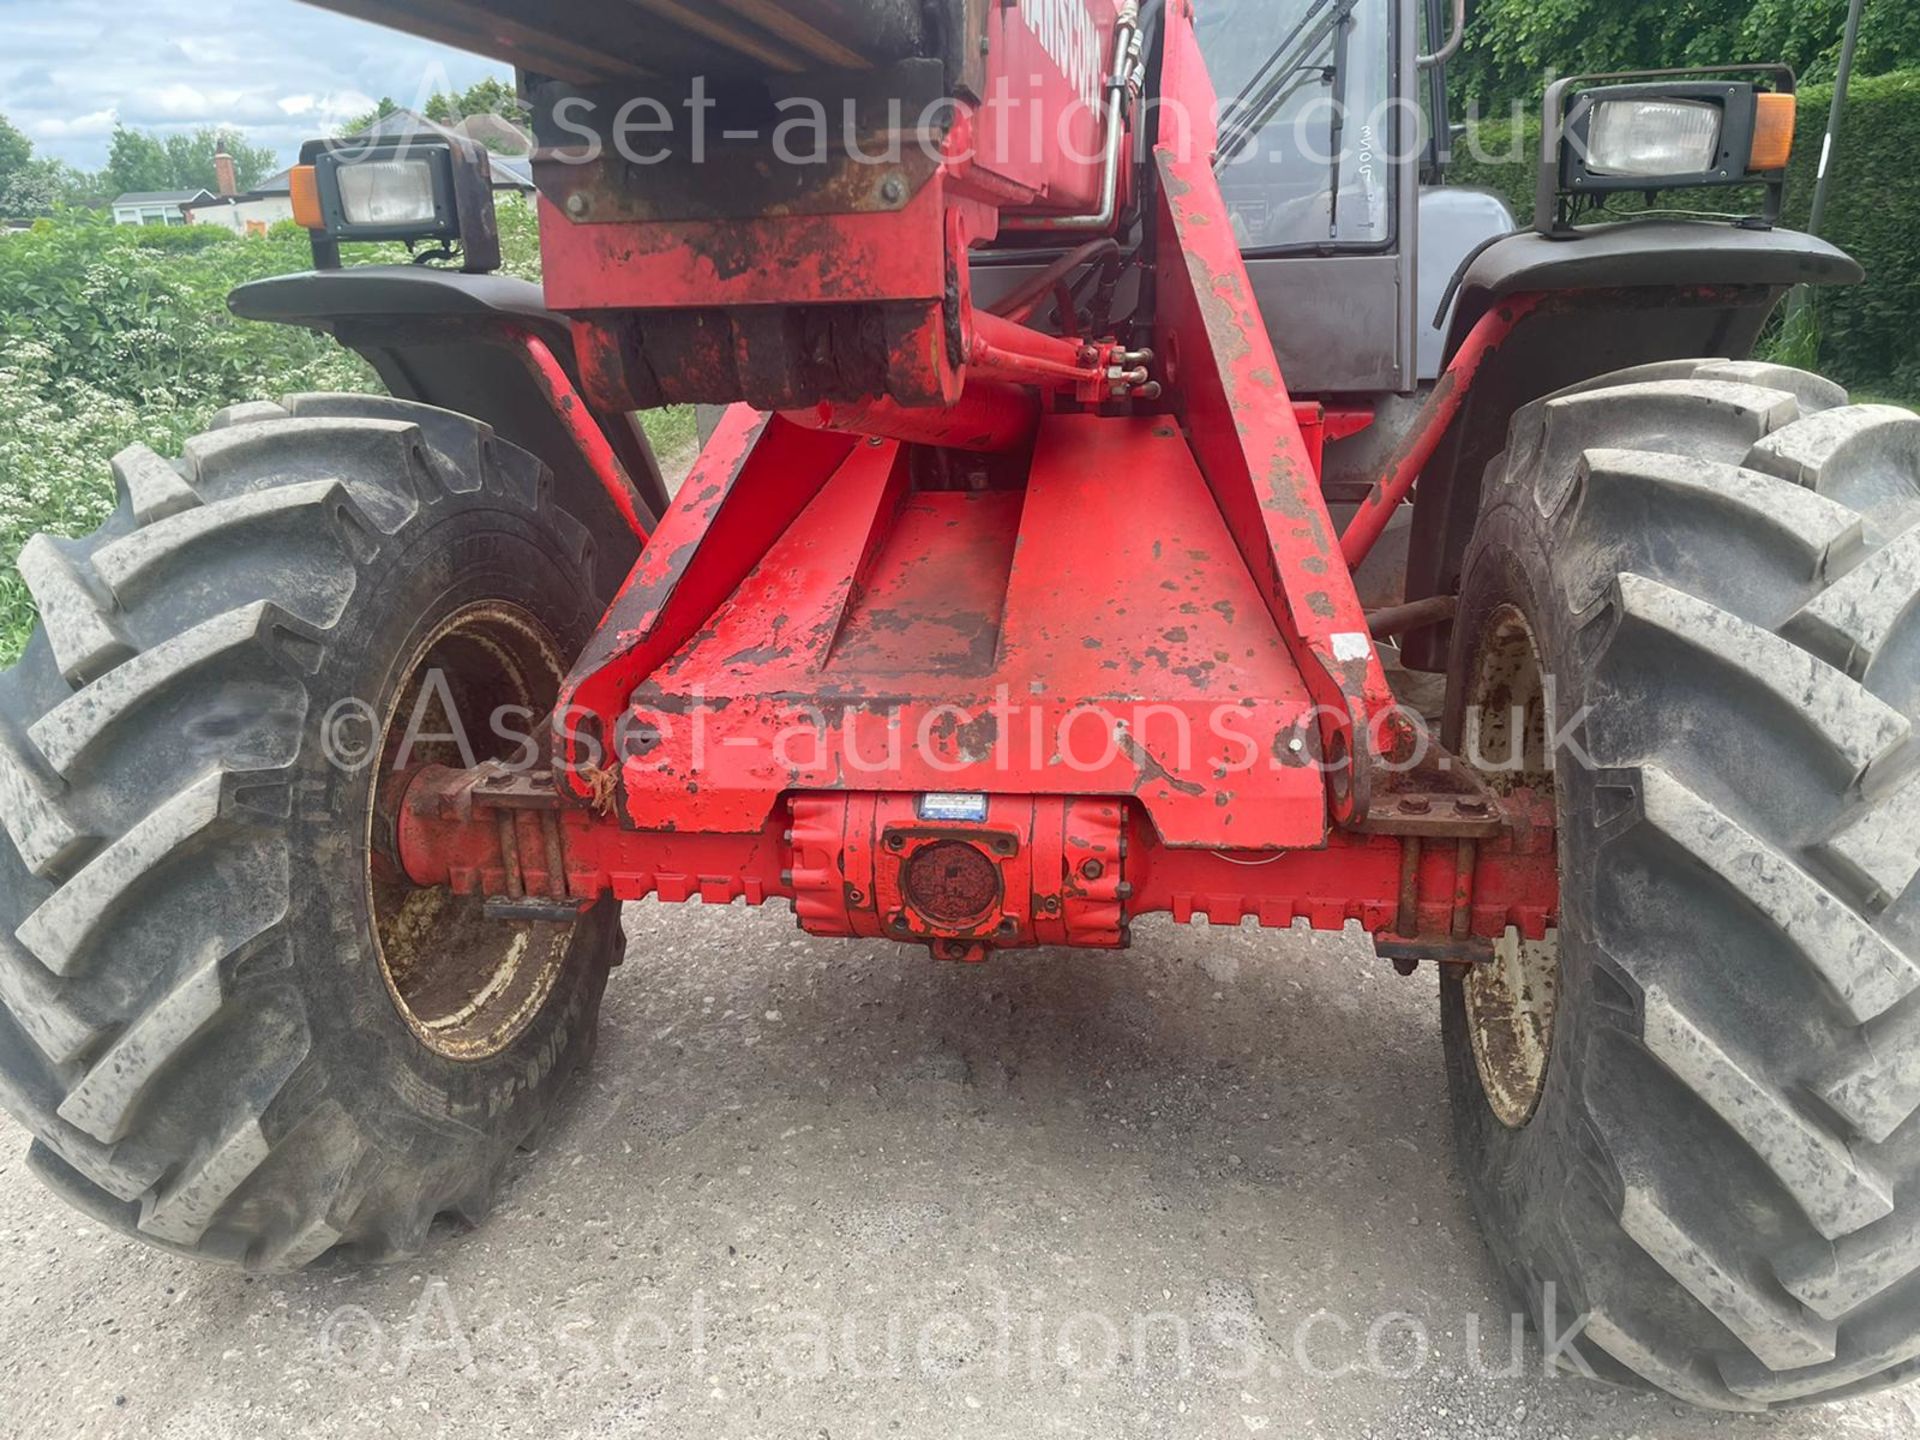 2000 MANITOU MLA 628 ARTICULATED TELESCOPIC TELEHANDLER, RUNS DRIVES AND LIFTS *PLUS VAT* - Image 17 of 26